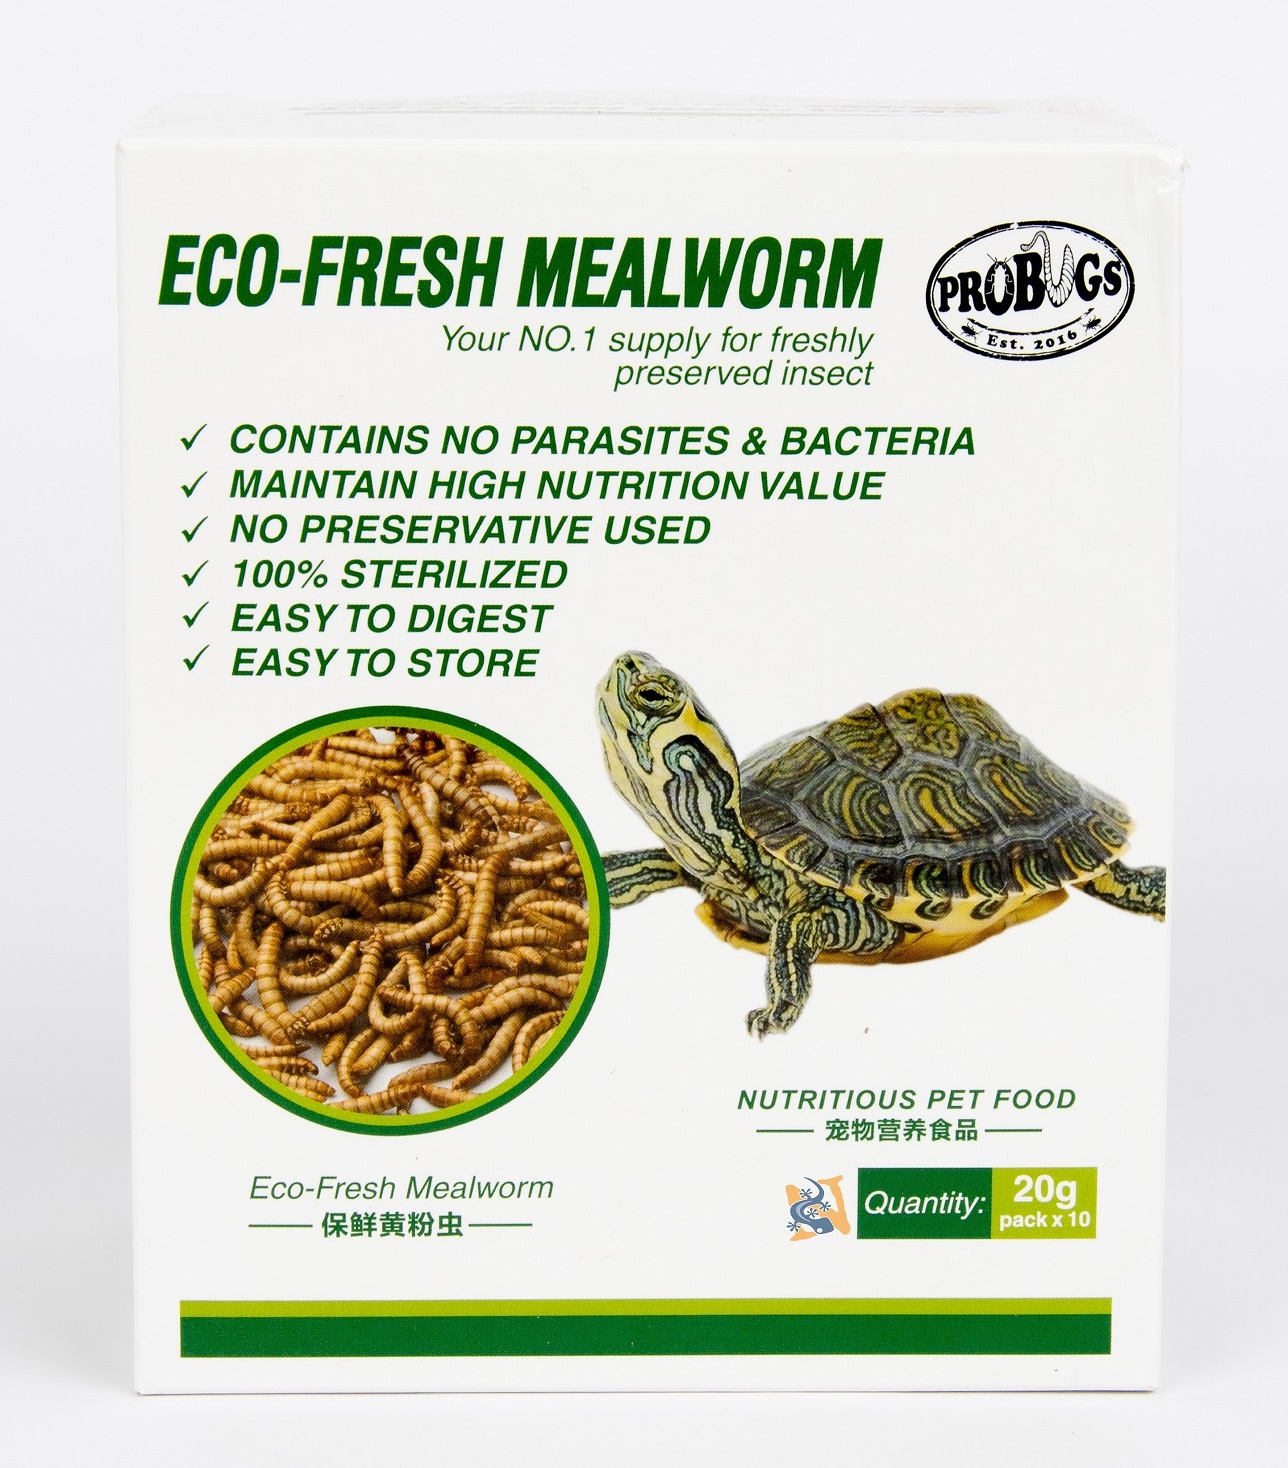 Eco-Fresh Mealworms - 10 pack